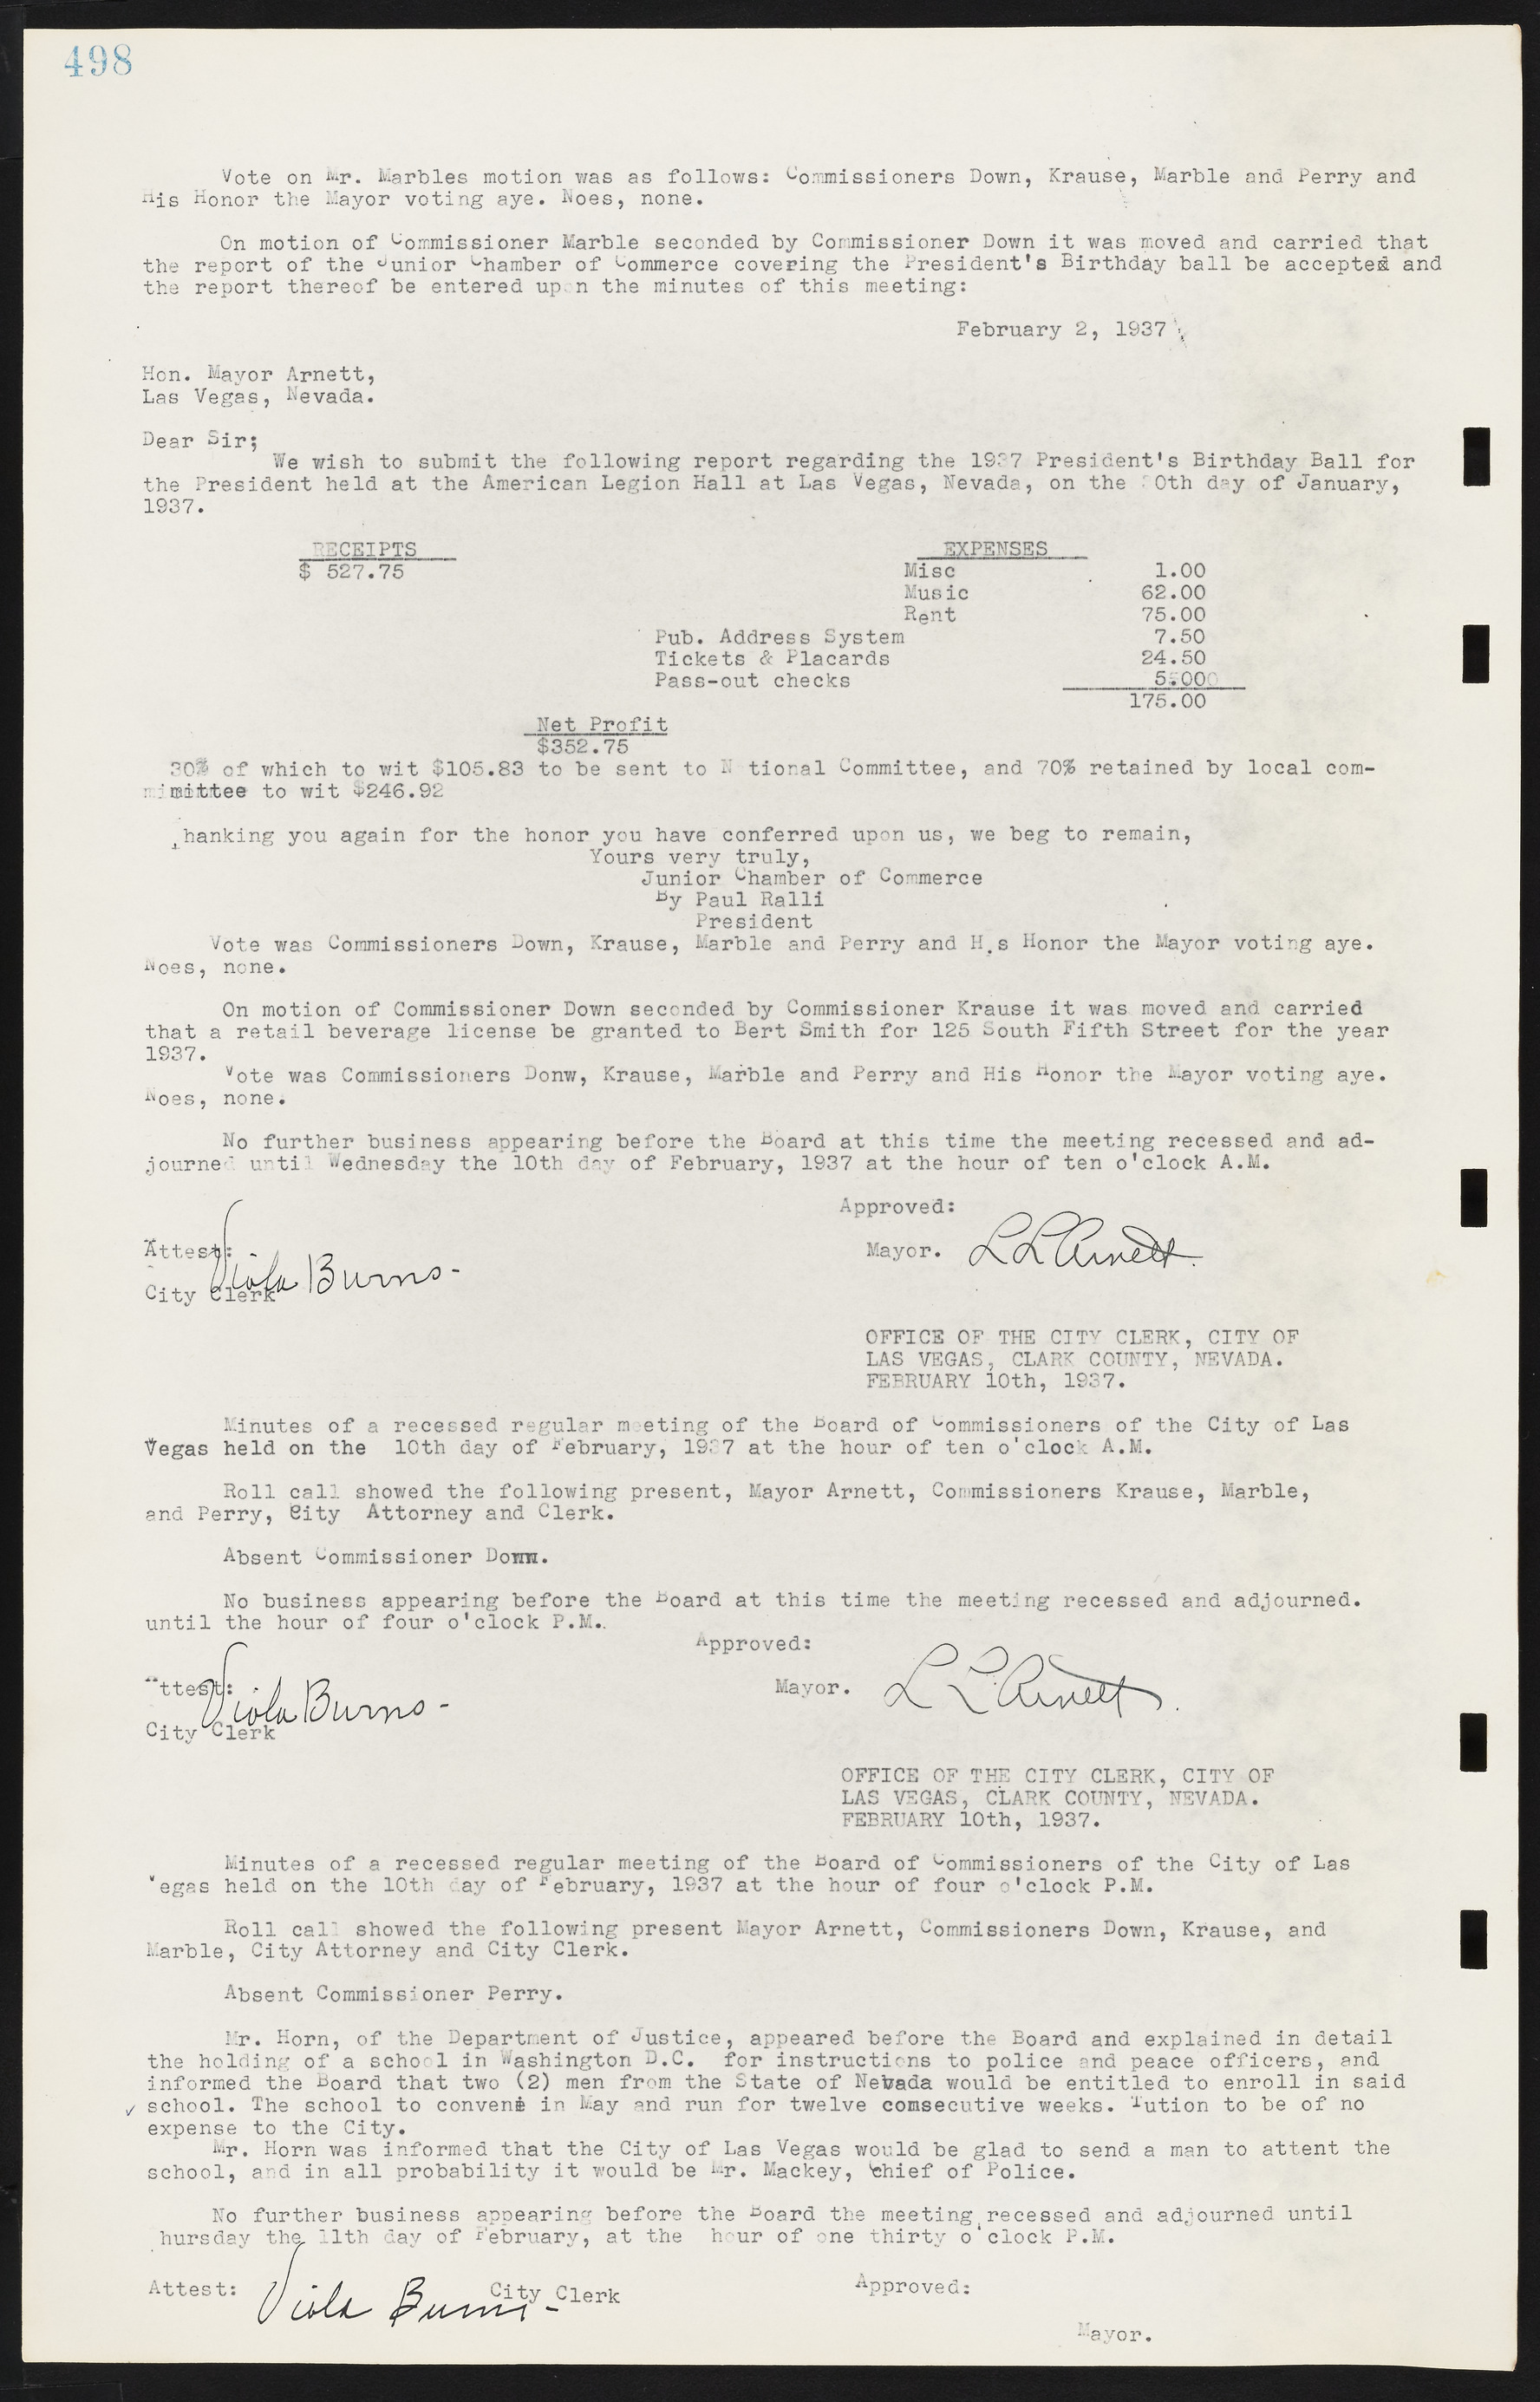 Las Vegas City Commission Minutes, May 14, 1929 to February 11, 1937, lvc000003-505